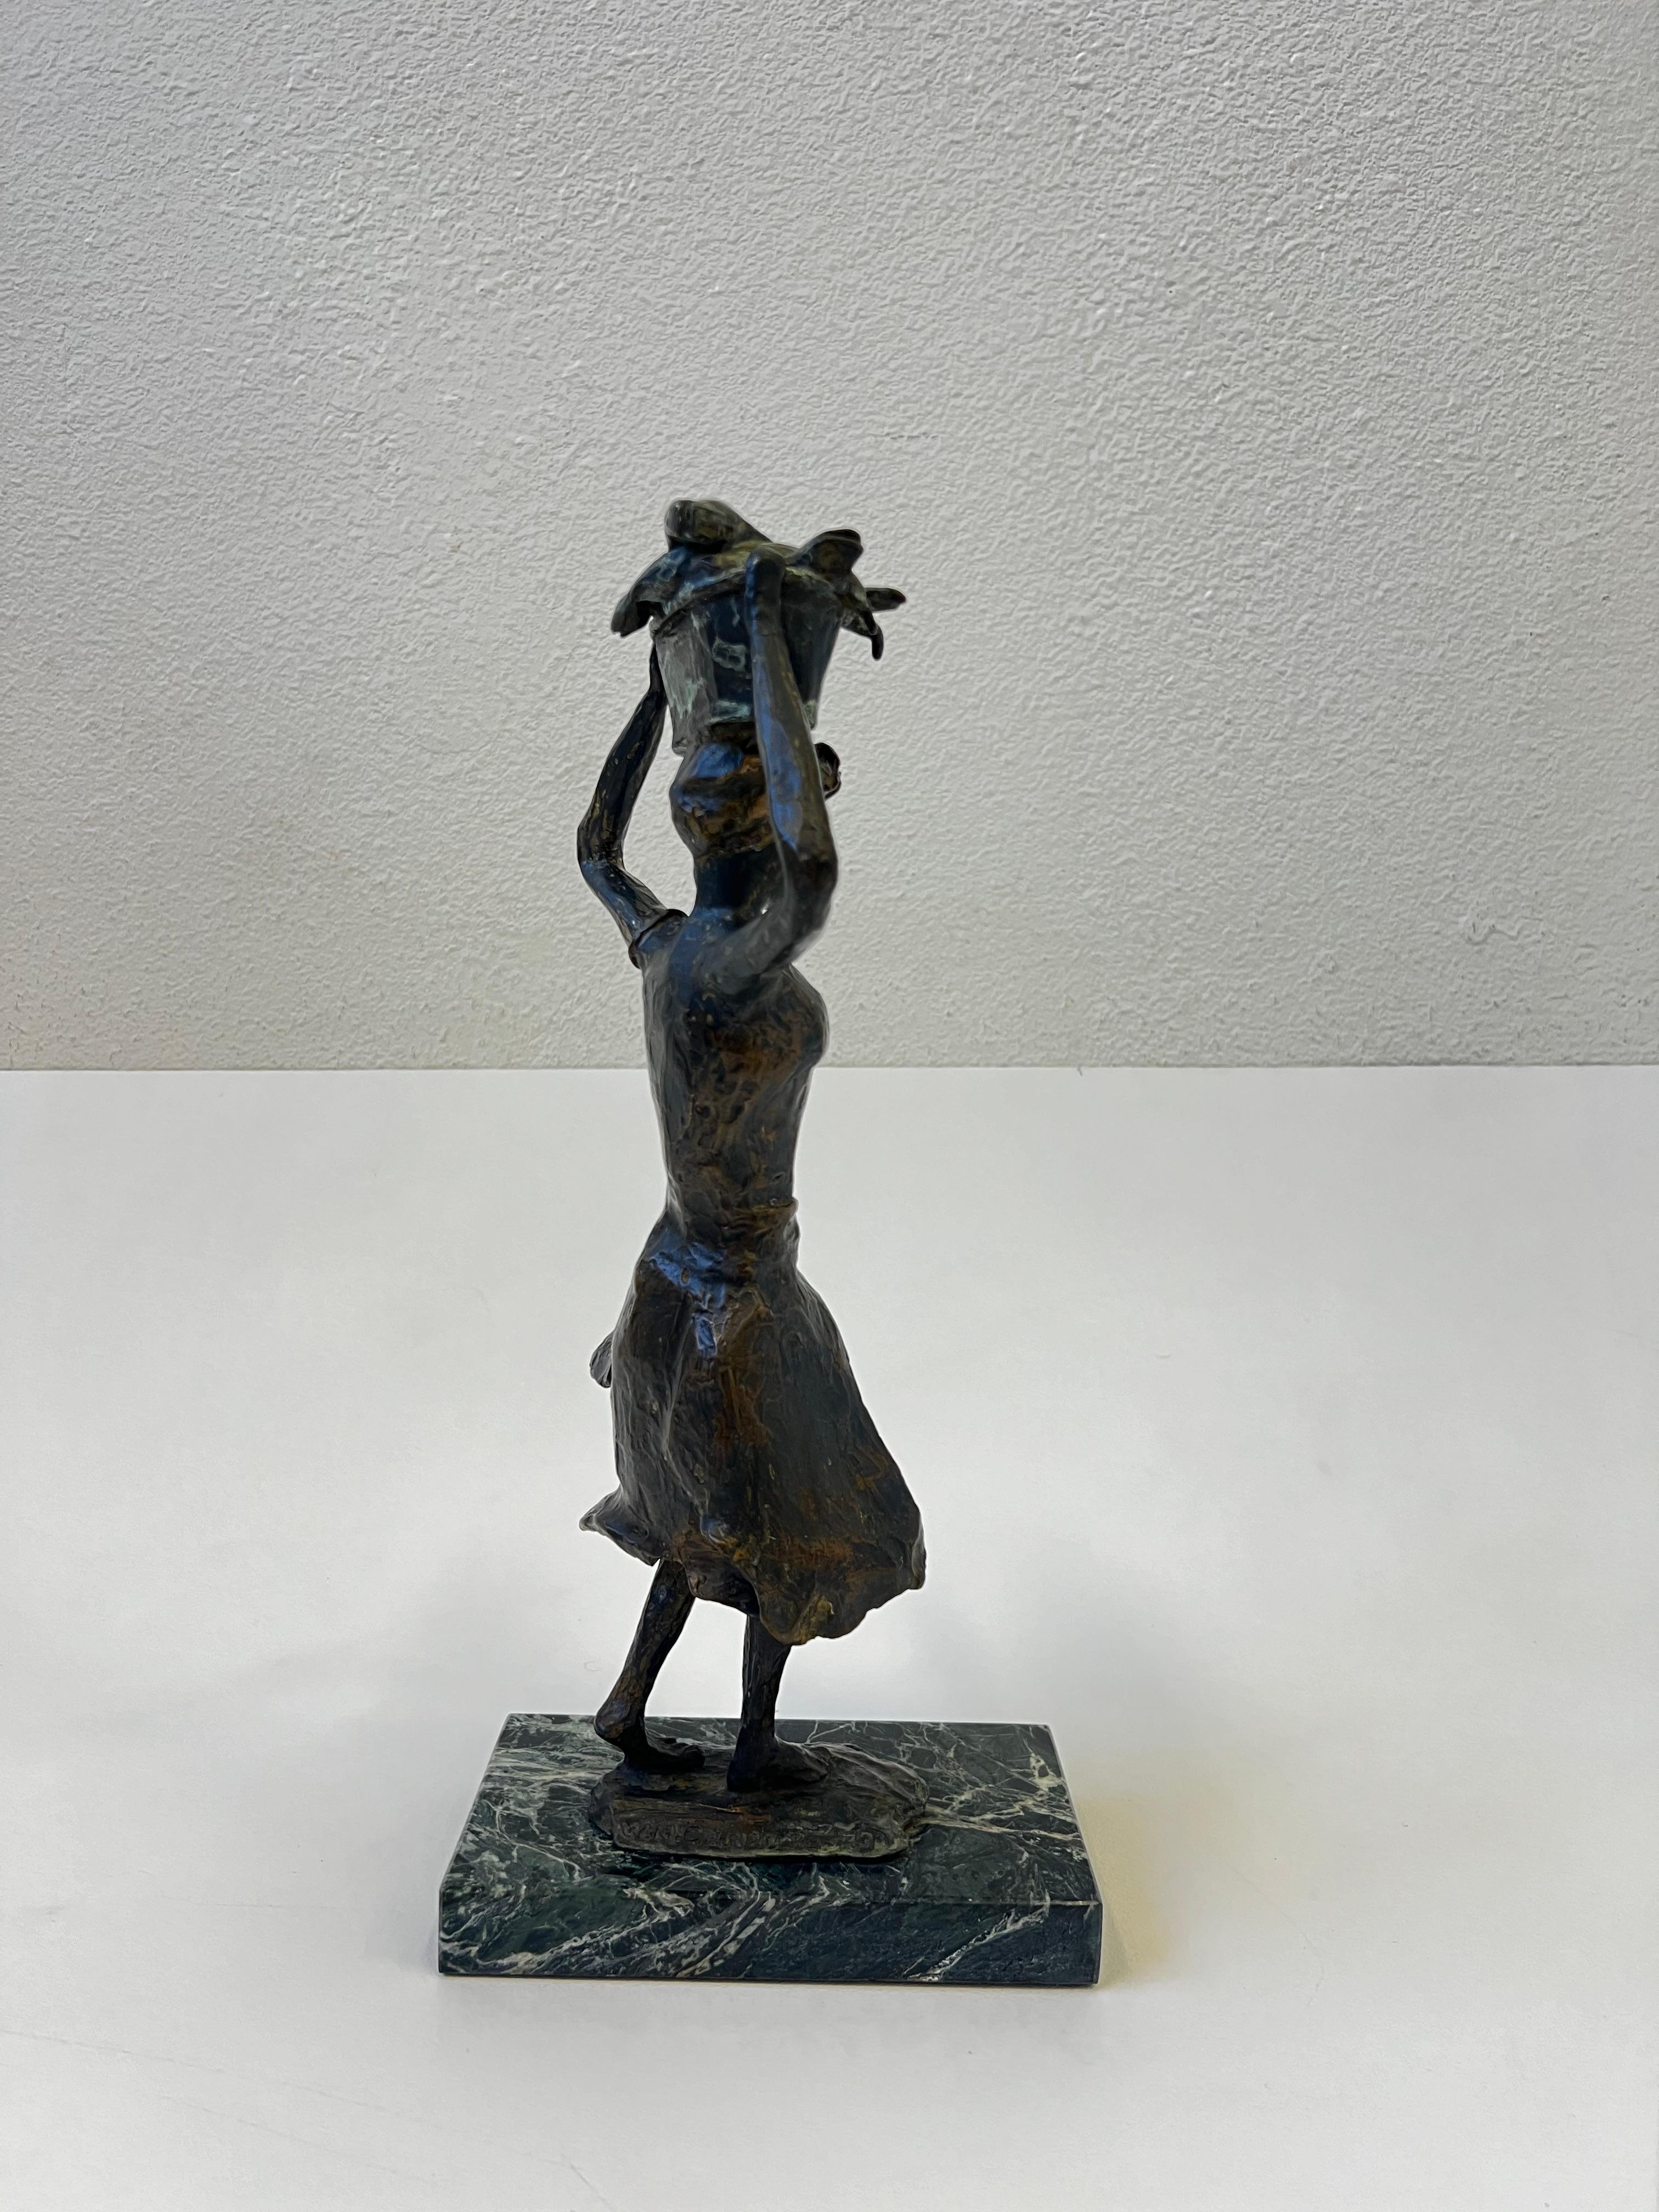 Spanish Women Cast Bronze Sculpture by W.N. Cardobo 1973 In Good Condition For Sale In Palm Springs, CA